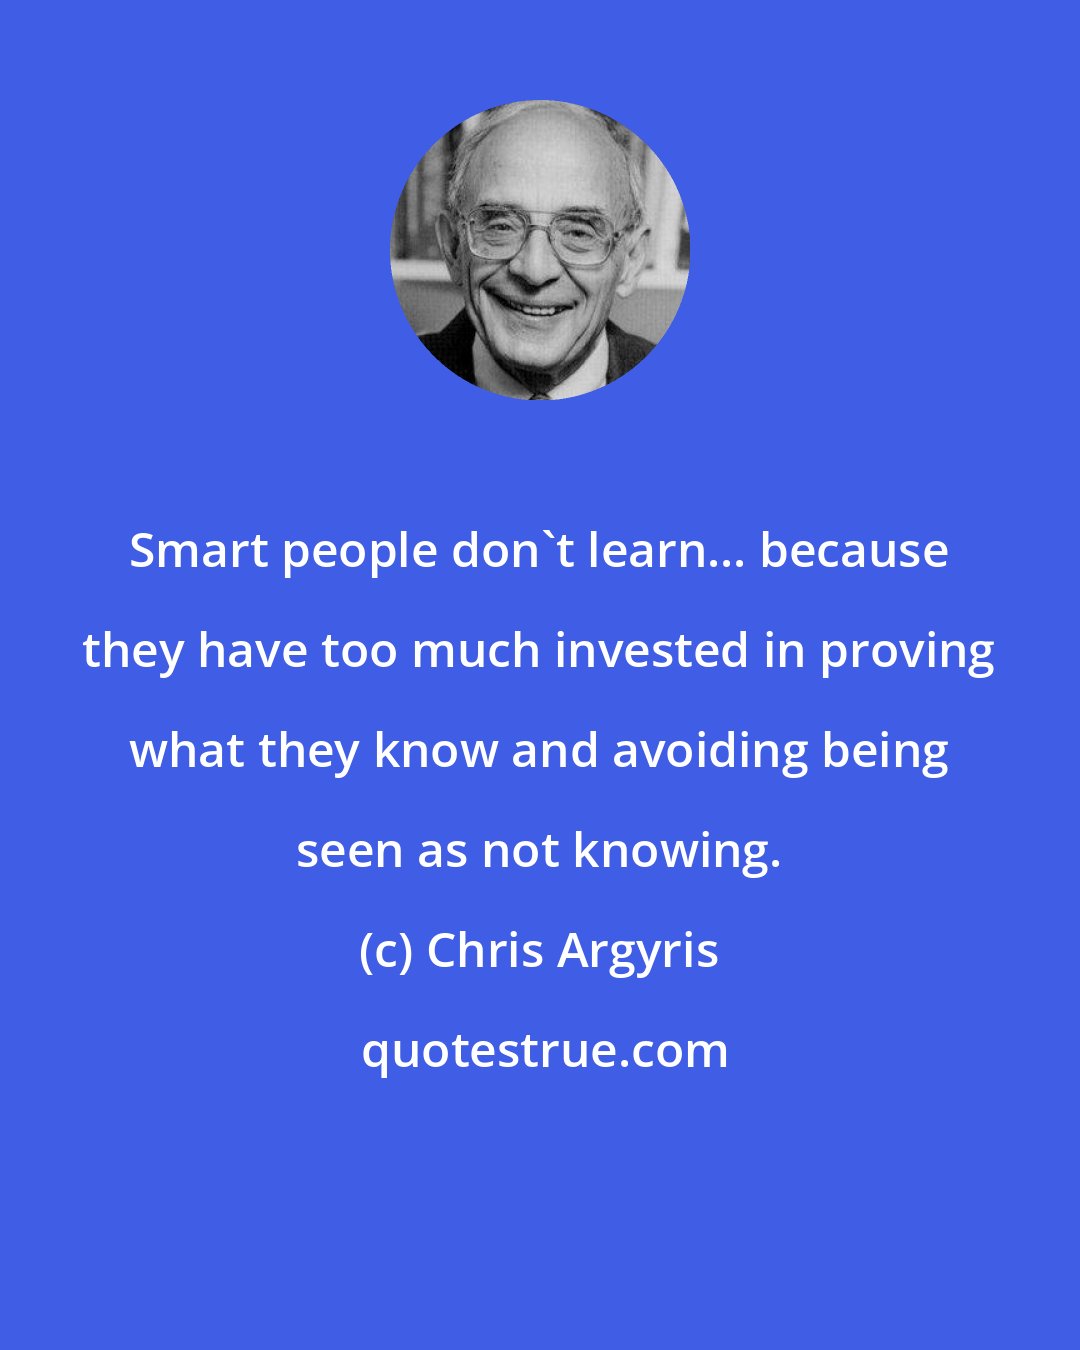 Chris Argyris: Smart people don't learn... because they have too much invested in proving what they know and avoiding being seen as not knowing.